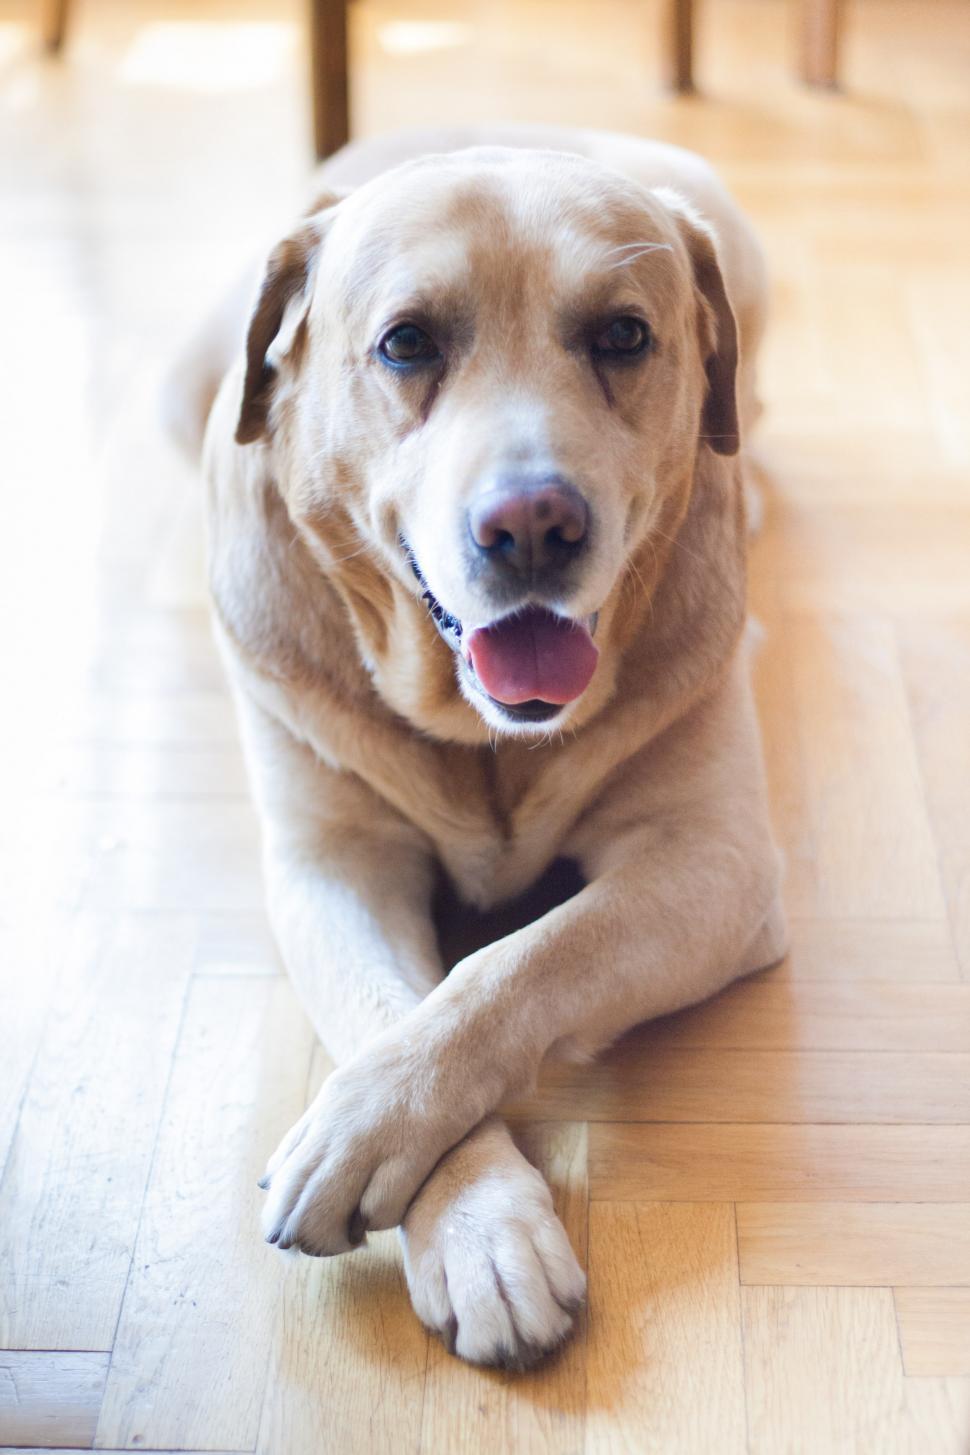 Free Image of Dog Laying on Floor With Paw Resting 